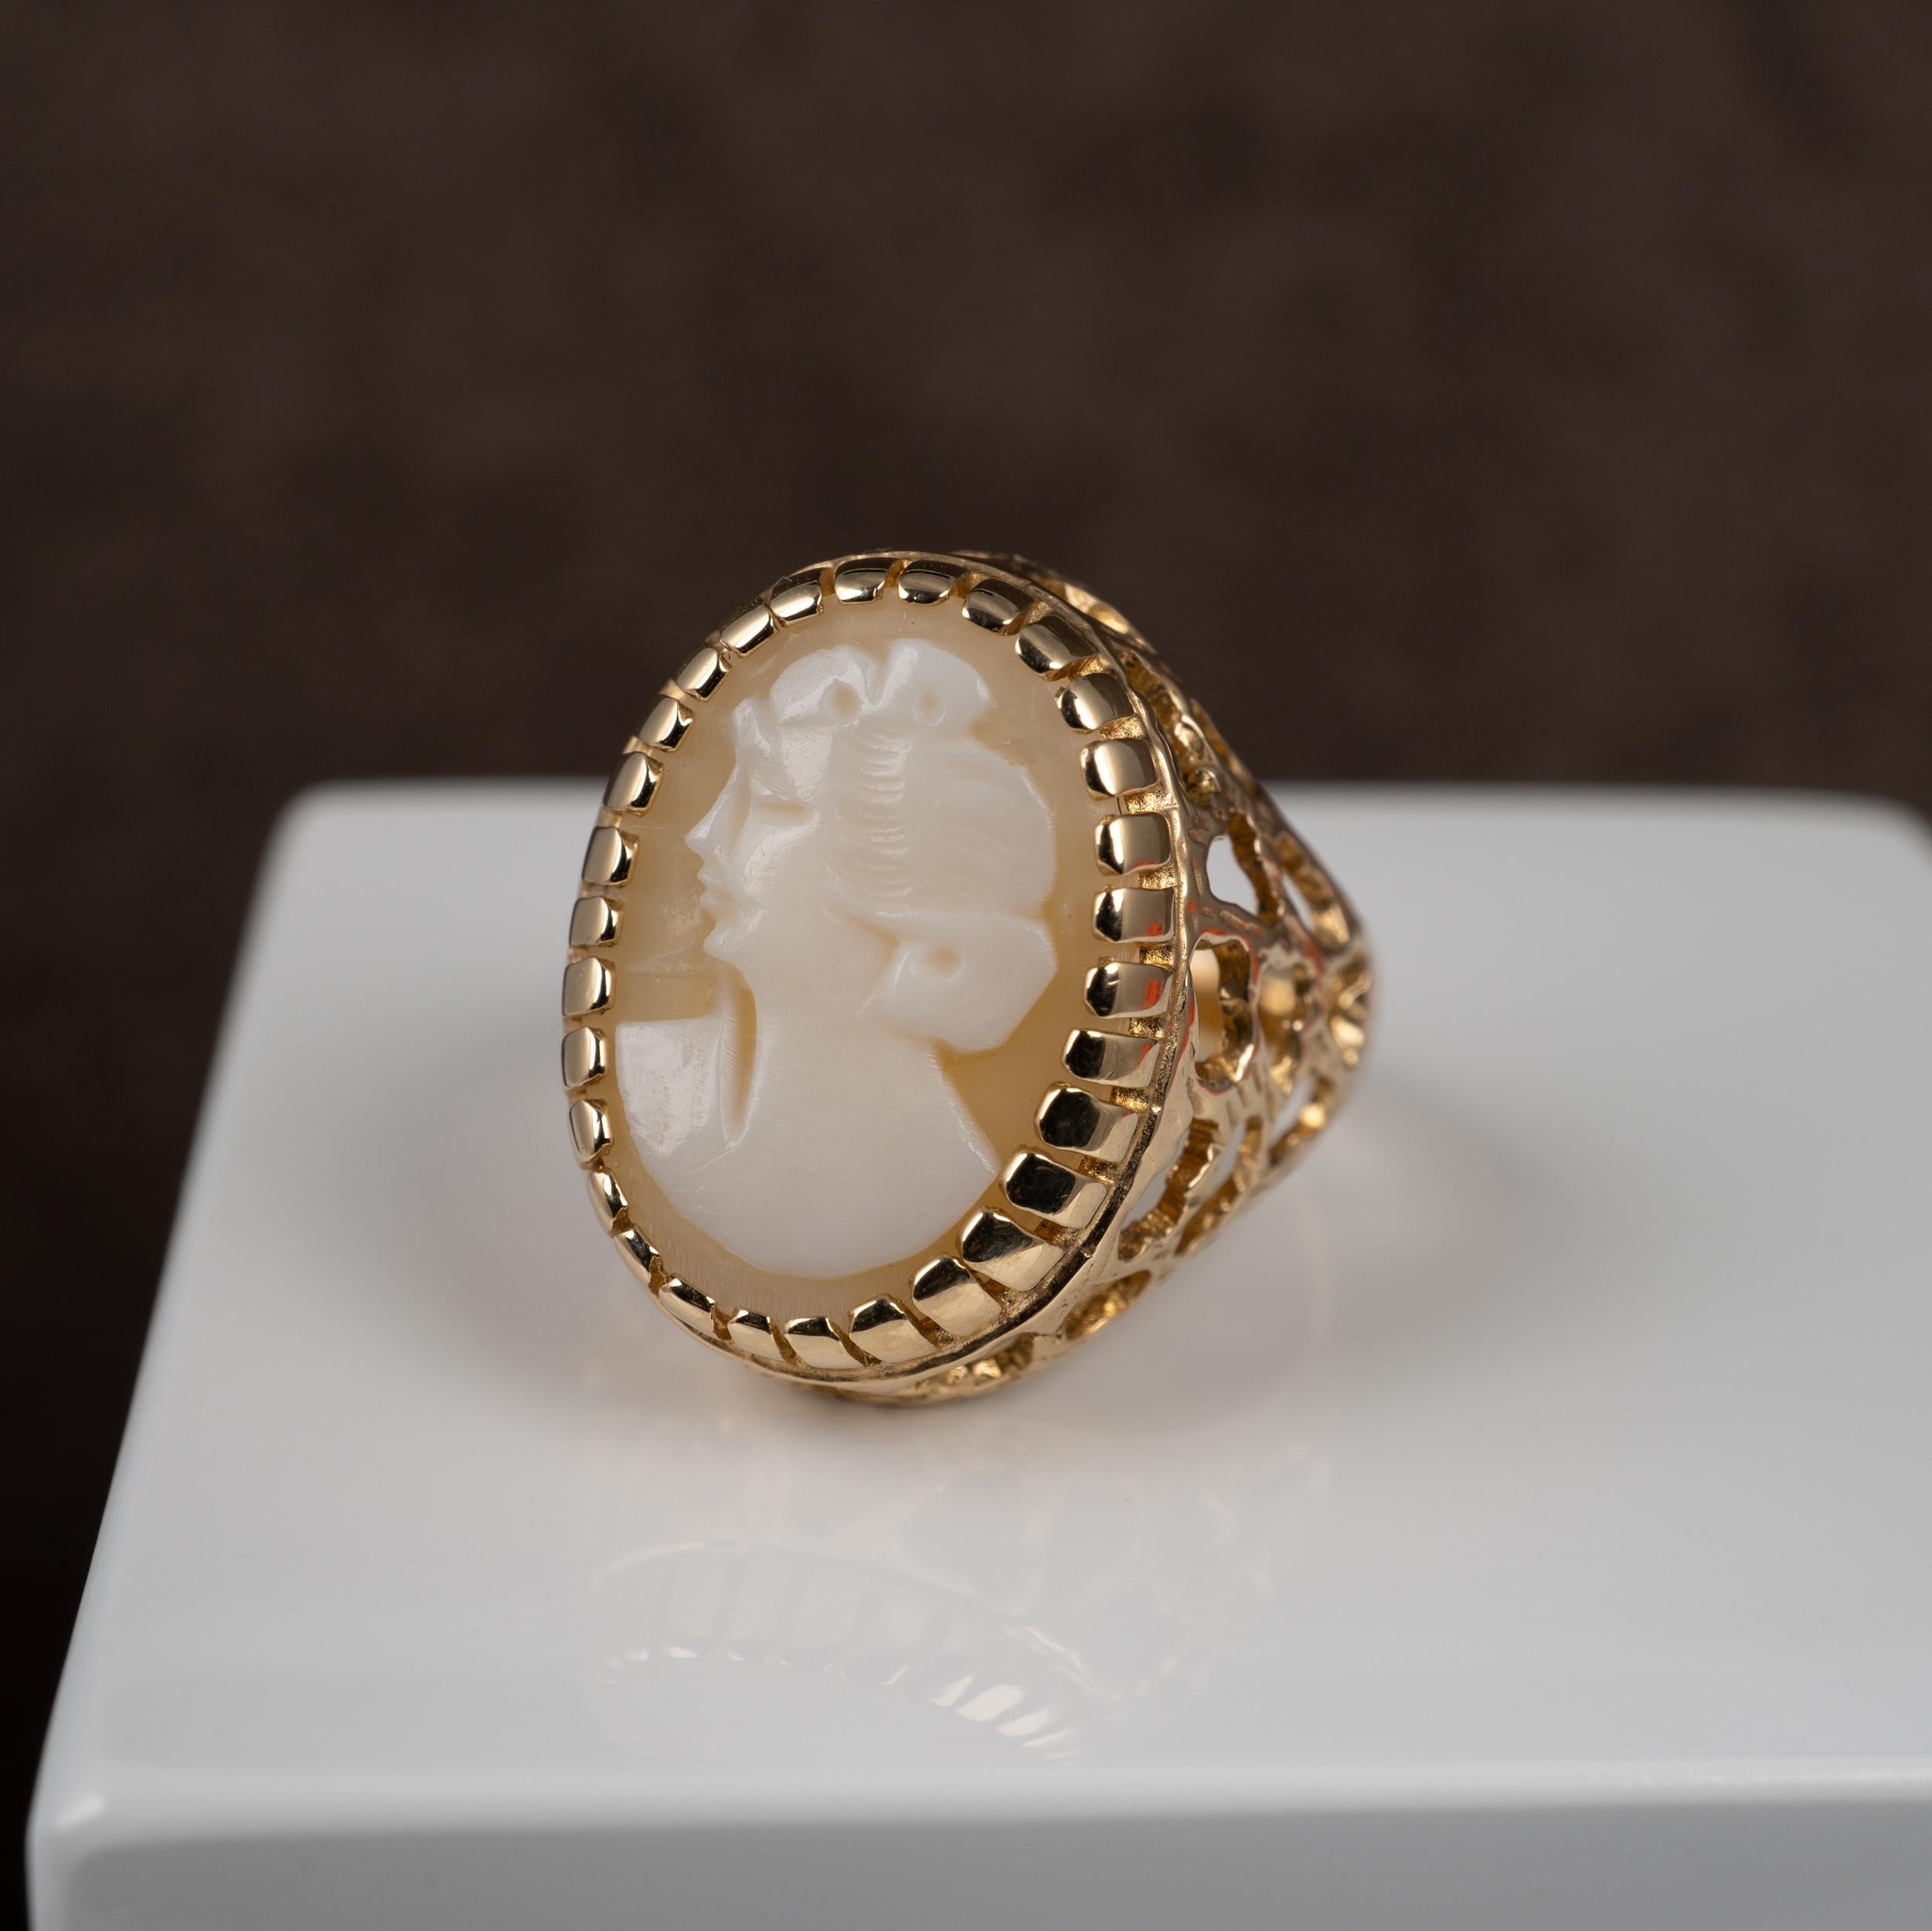 A superb 1970s vintage cameo ring features an open pierced decorative basket setting. Made in 9 karat yellow gold, the oval cameo is nicely crafted with bas-relief raised white demur looking female portrait. The gold setting and shoulders are